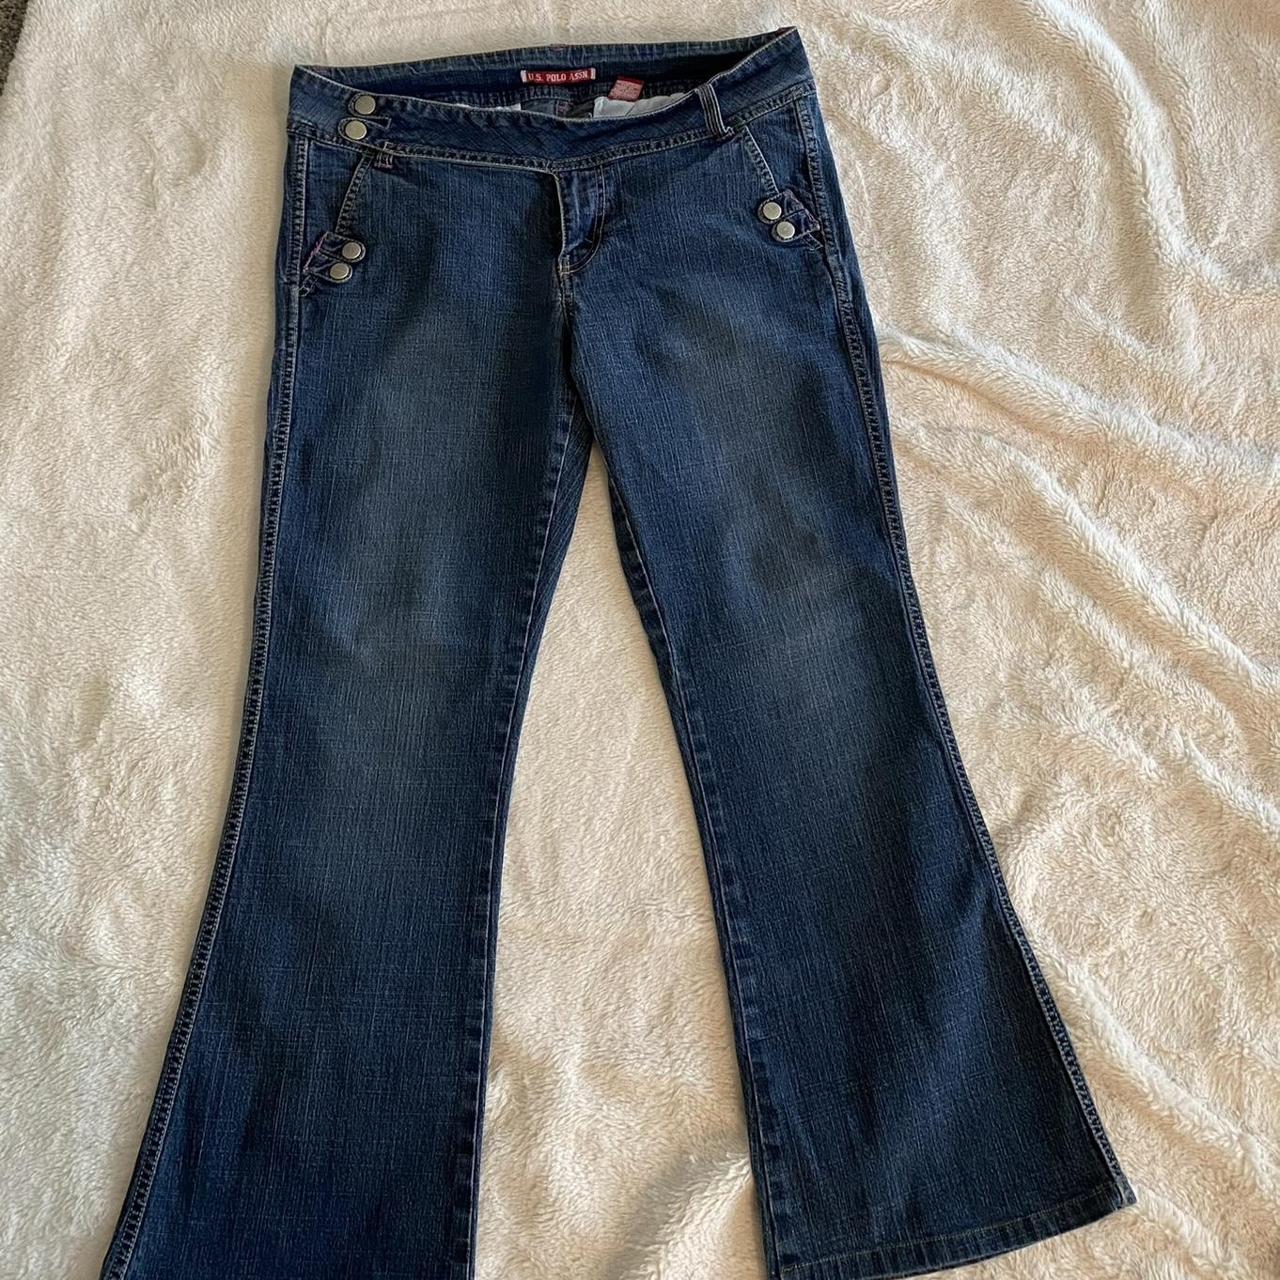 90s Low Rise Polo Association Jeans 🪽 These not... - Depop